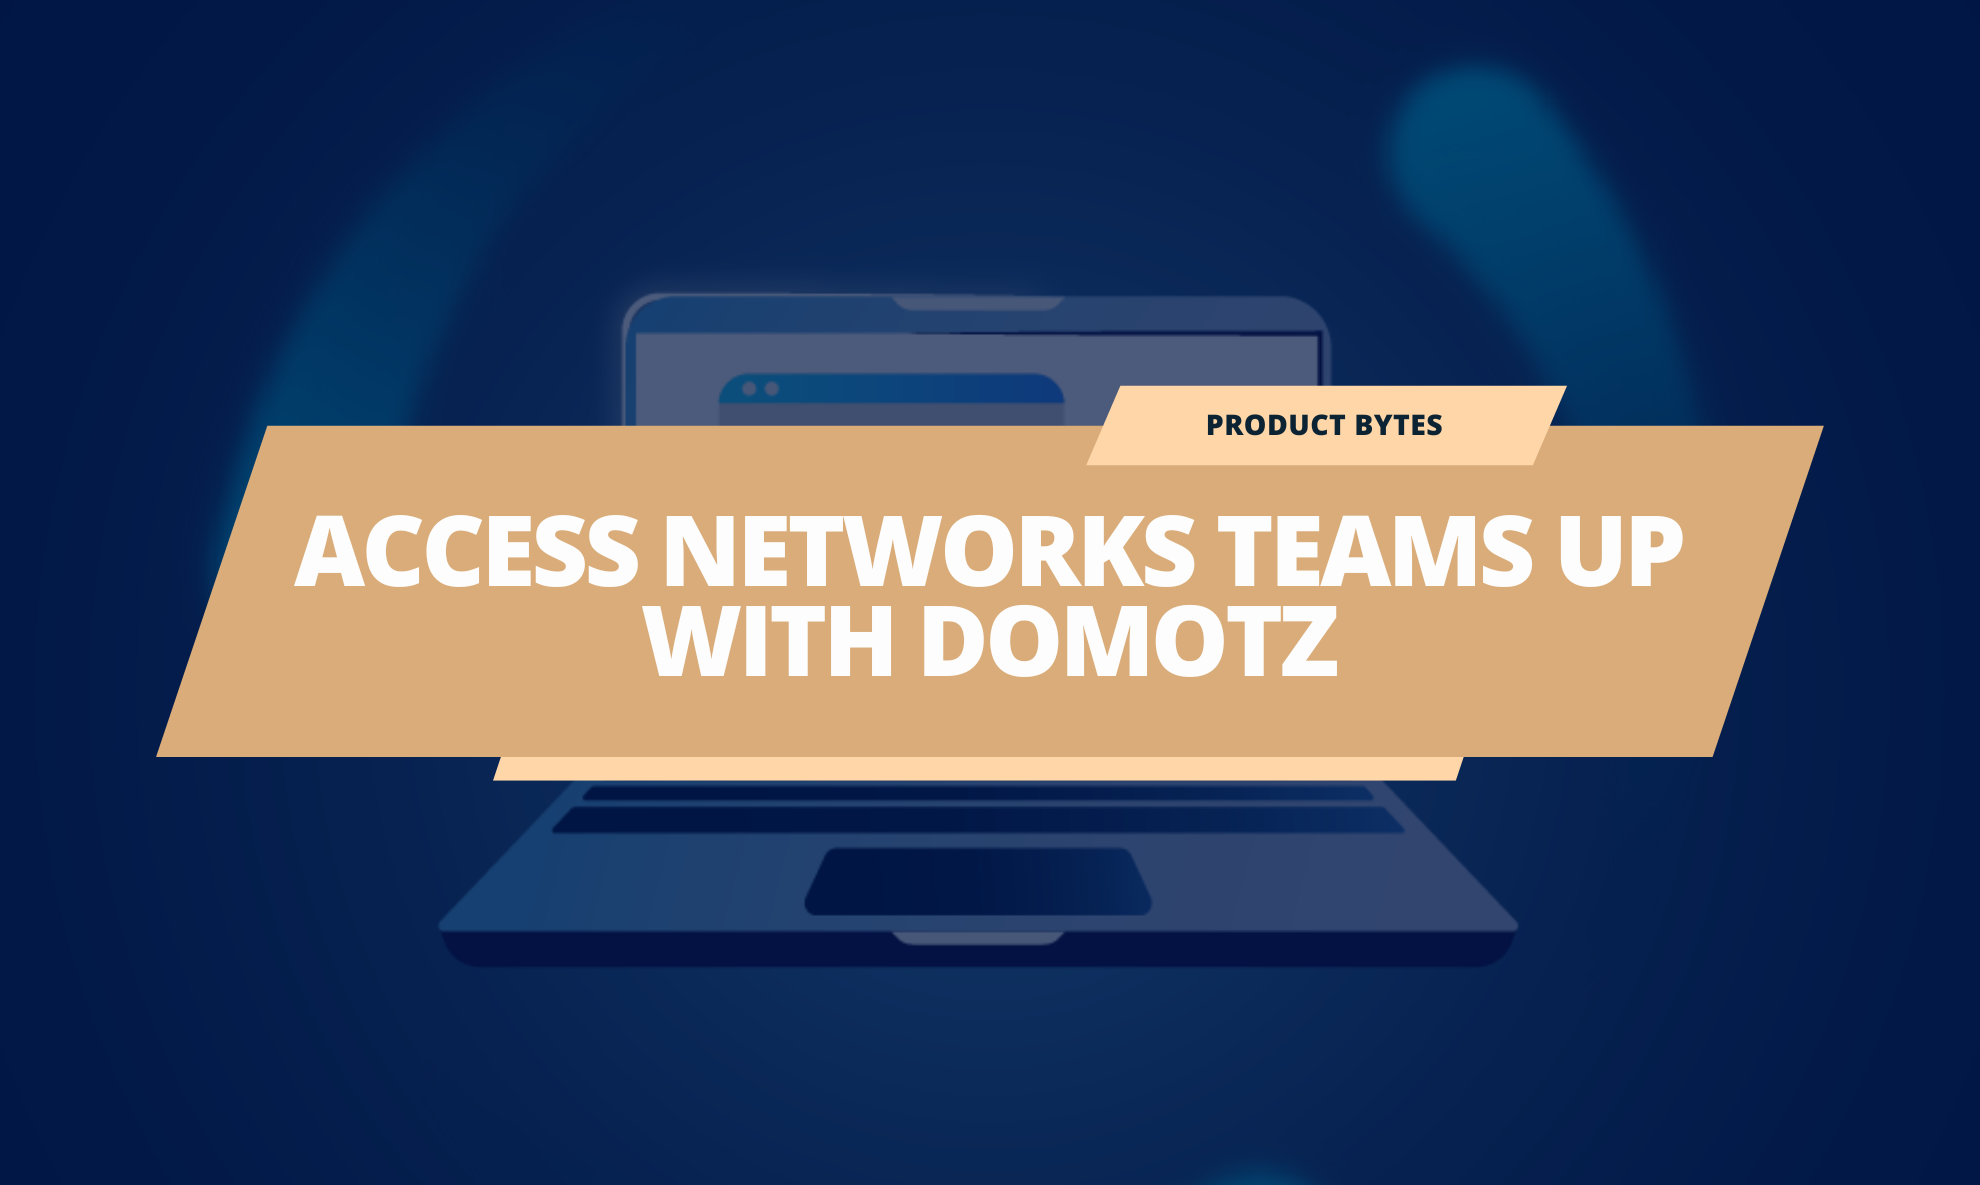 Access Networks Teams Up With Domotz for better Monitoring